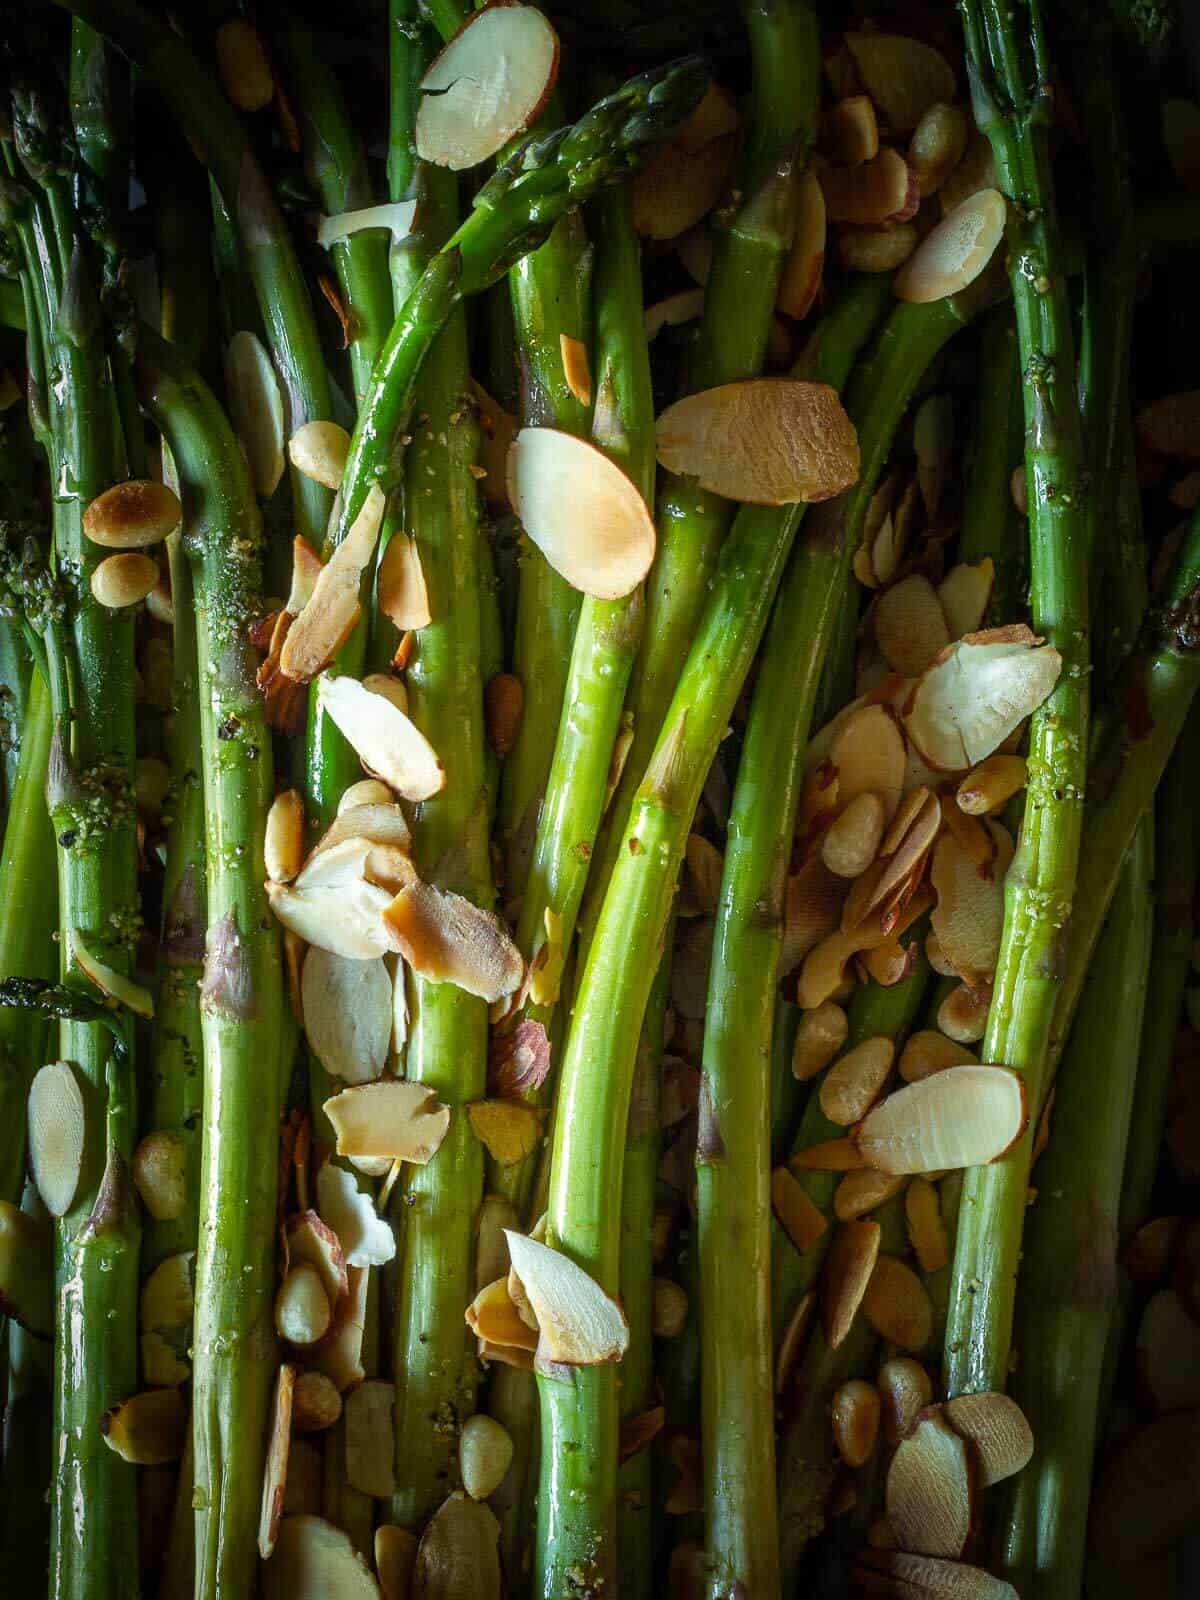 Grilled Asparagus with almonds